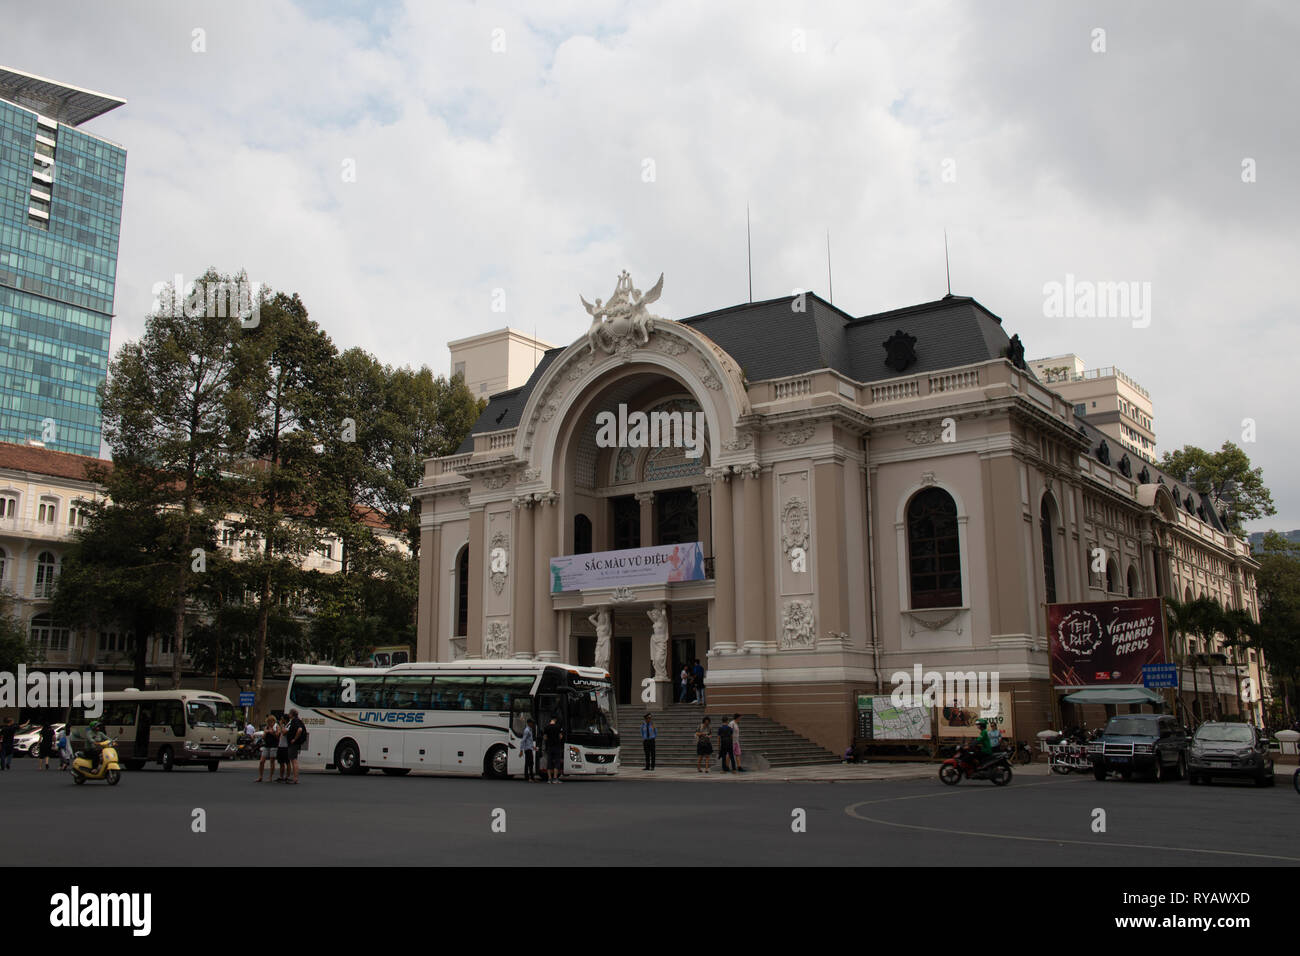 District 1,  Ho Chi Minh City, Vietnam, Wednesday 13th March 2019.  Saigon weather::Hot spring day with highs of 36 degrees. The Saigon Opera House in Ho Chi Minh is an elegant colonial building at the intersection of Le Loi and Dong Khoi Street in District 1, very close to the famous Notre Dame Cathedral and the classic Central Post Office. The restored three-storey 800-seat Opera House was built in 1897 and is used for staging not only opera but also a wide range of performing arts including ballet, musical concerts, Vietnamese traditional dance and plays. Credit: WansfordPhoto/Alamy Live Ne Stock Photo